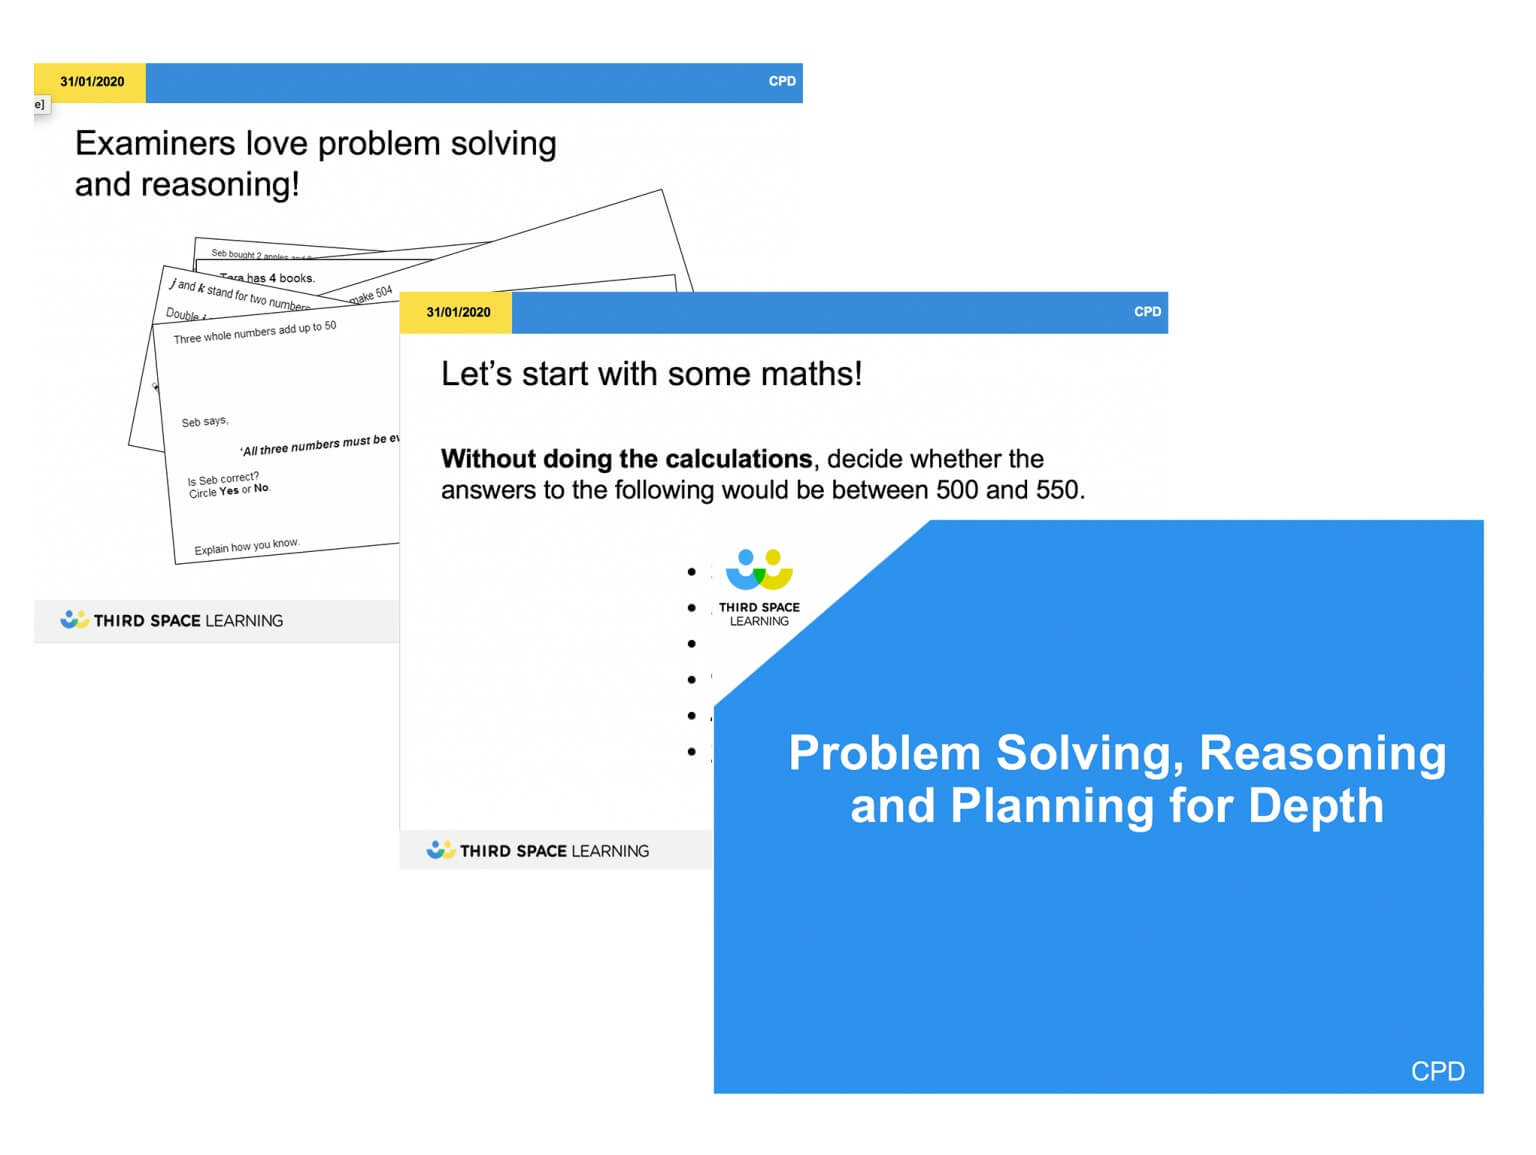 Problem Solving, Reasoning and Planning for Depth